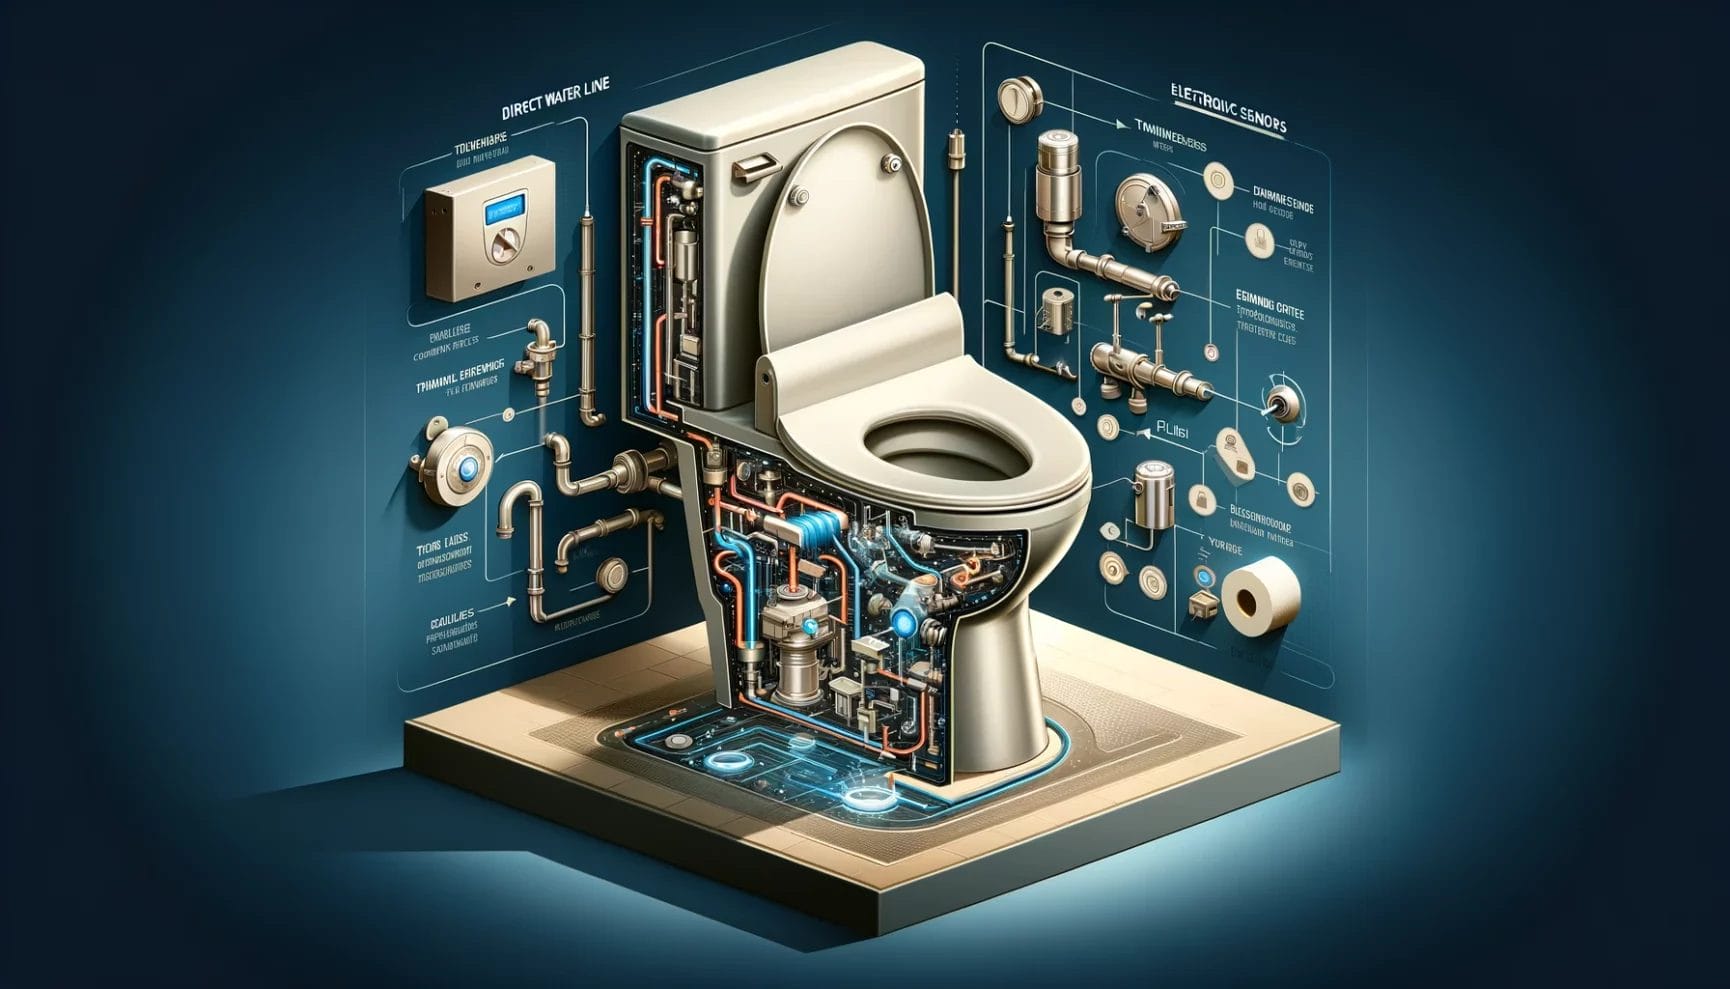 Exploded-view illustration of a modern toilet showcasing its components and internal mechanisms.